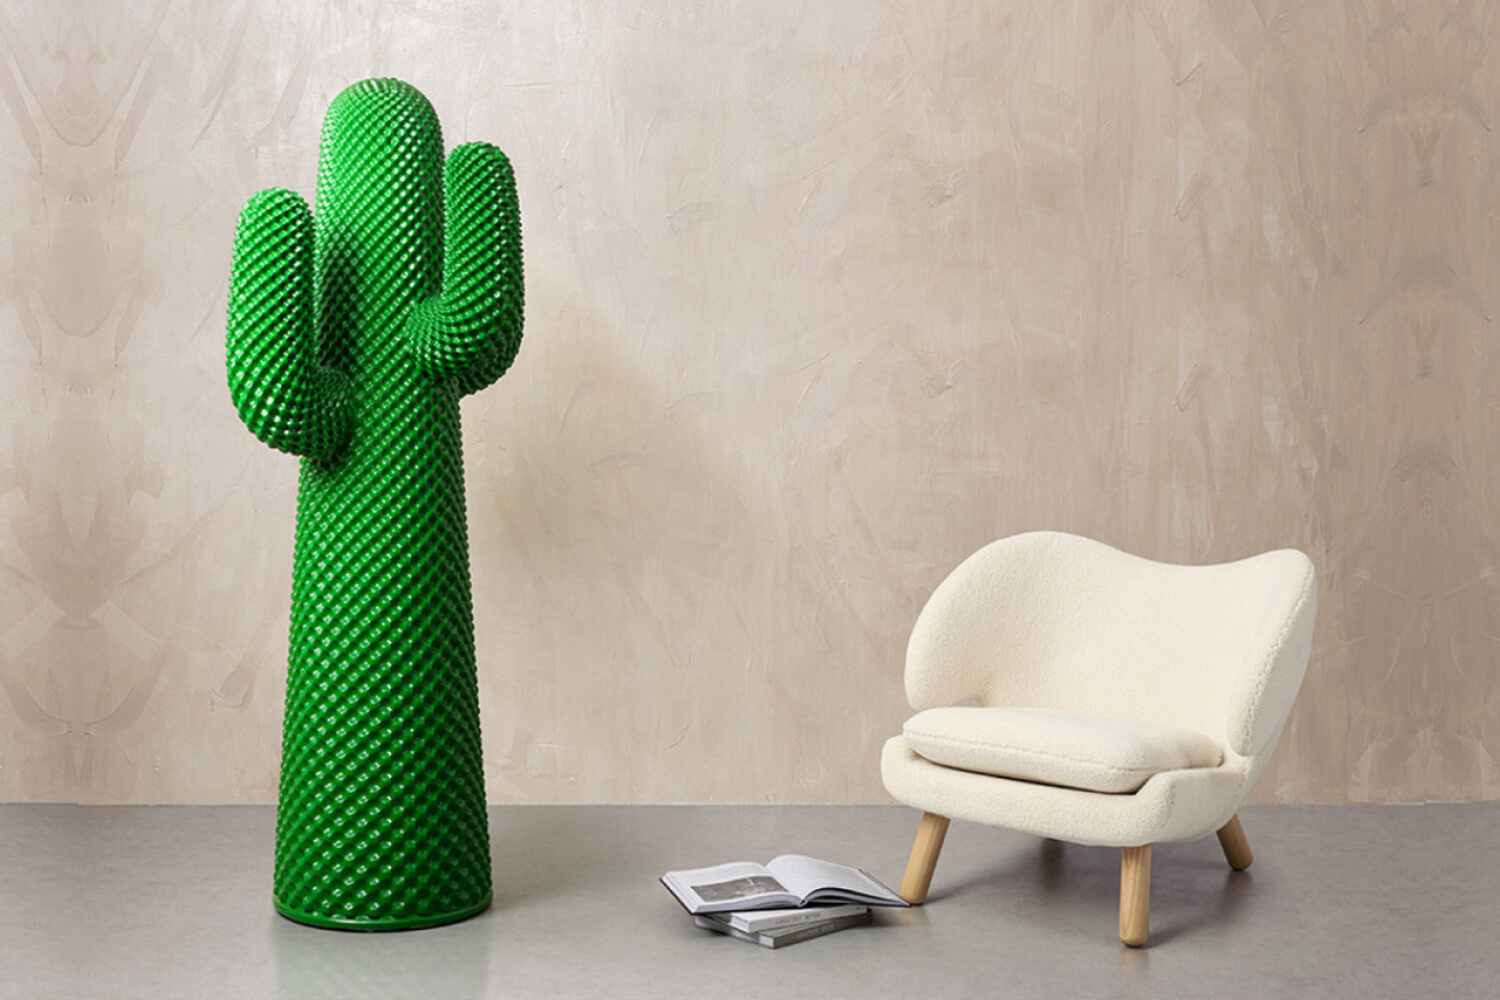 A room featuring the Drocco & Mello Sculptural Cactus Coat Rack, a vibrant green, cactus-shaped piece with a textured surface, and the Finn Juhl Pelican Chair. 